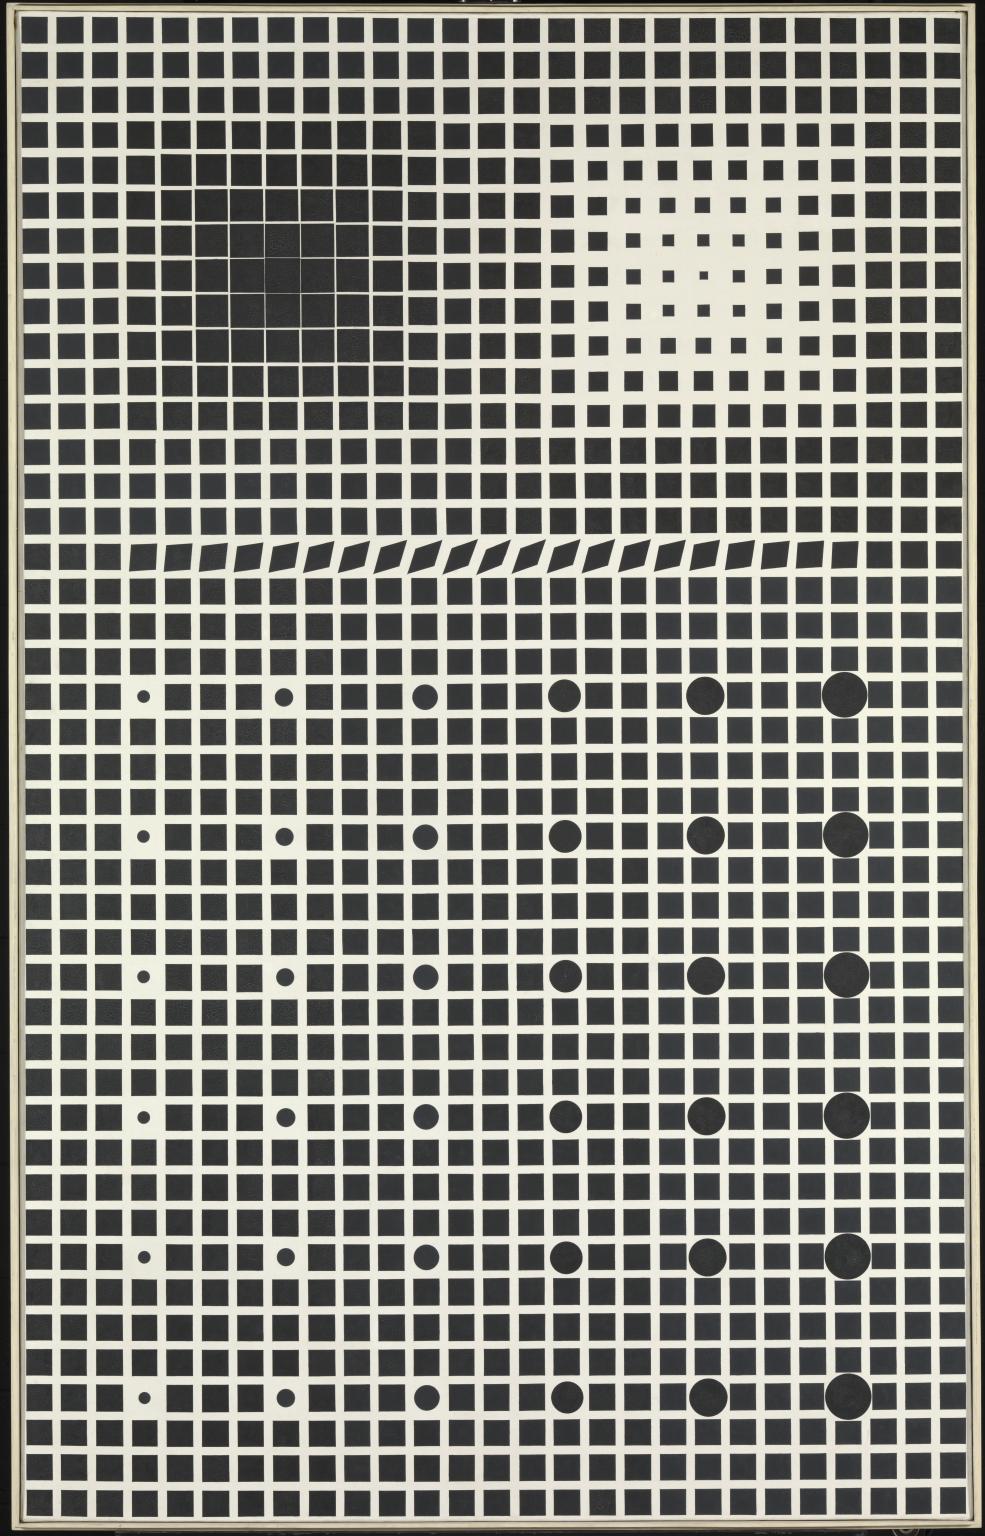 Supernovae by Victor Vasarely - 1959 - 1961 - 244 x 154 cm Private Sammlung